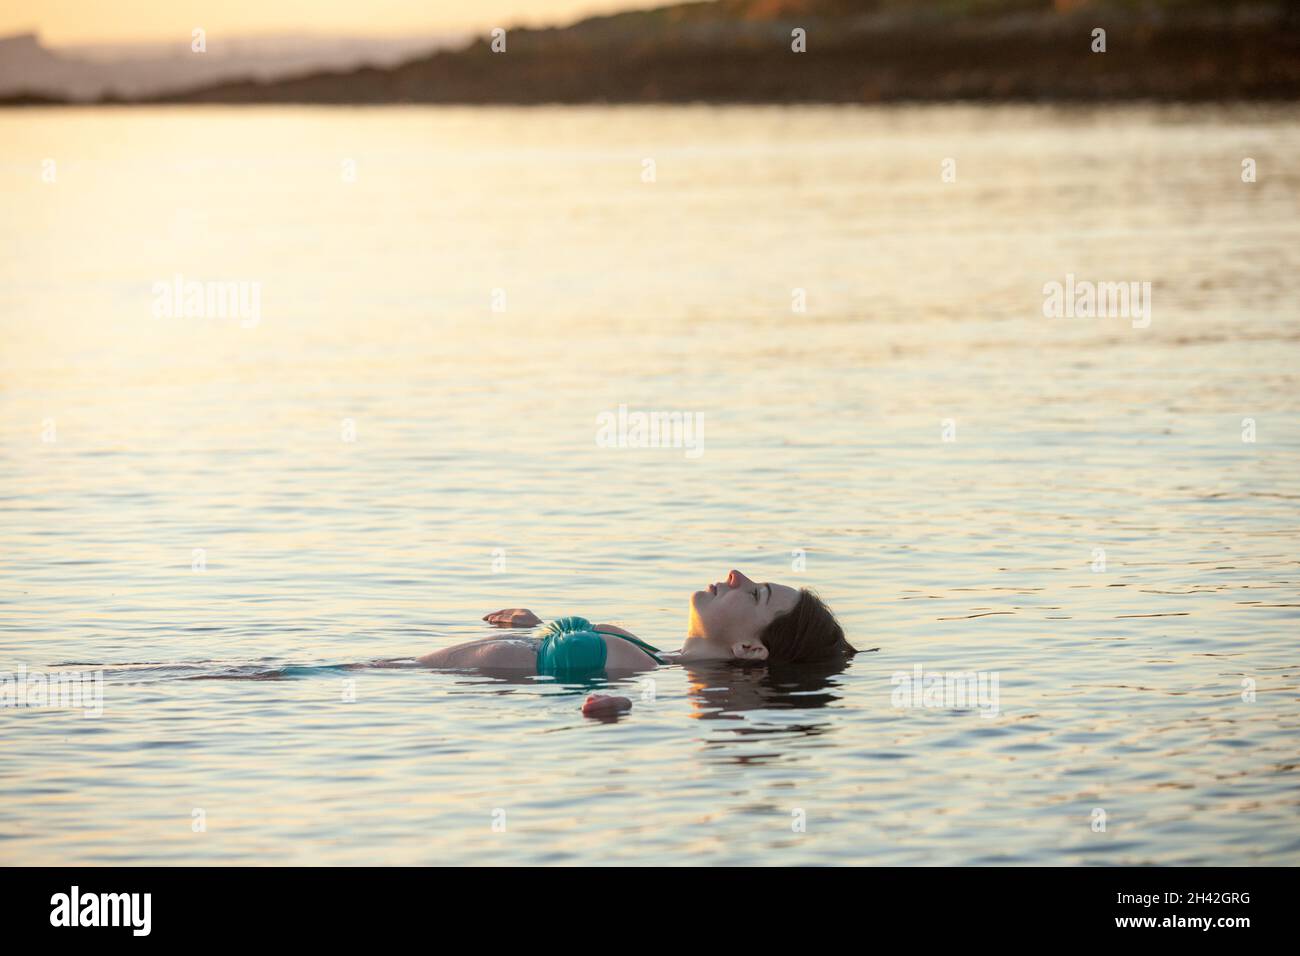 A woman lying on her back floating in cold sea water Stock Photo